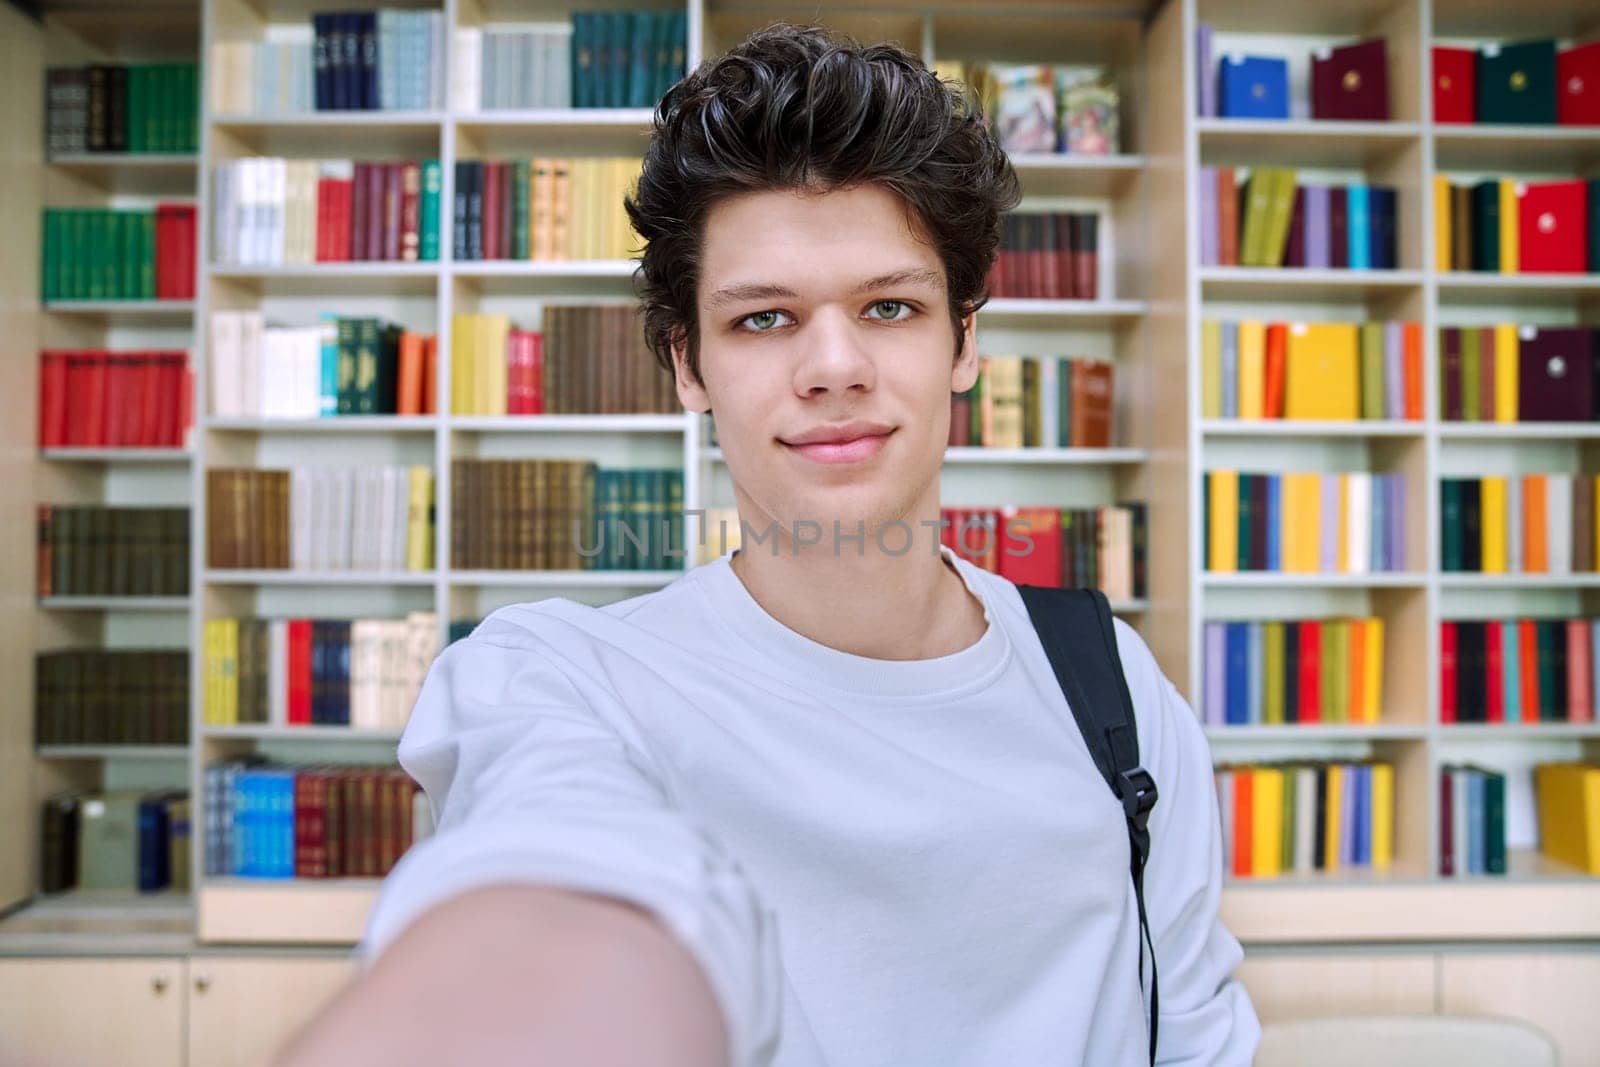 Selfie portrait of smiling handsome college student guy inside library of educational building. Education, youth, lifestyle concept